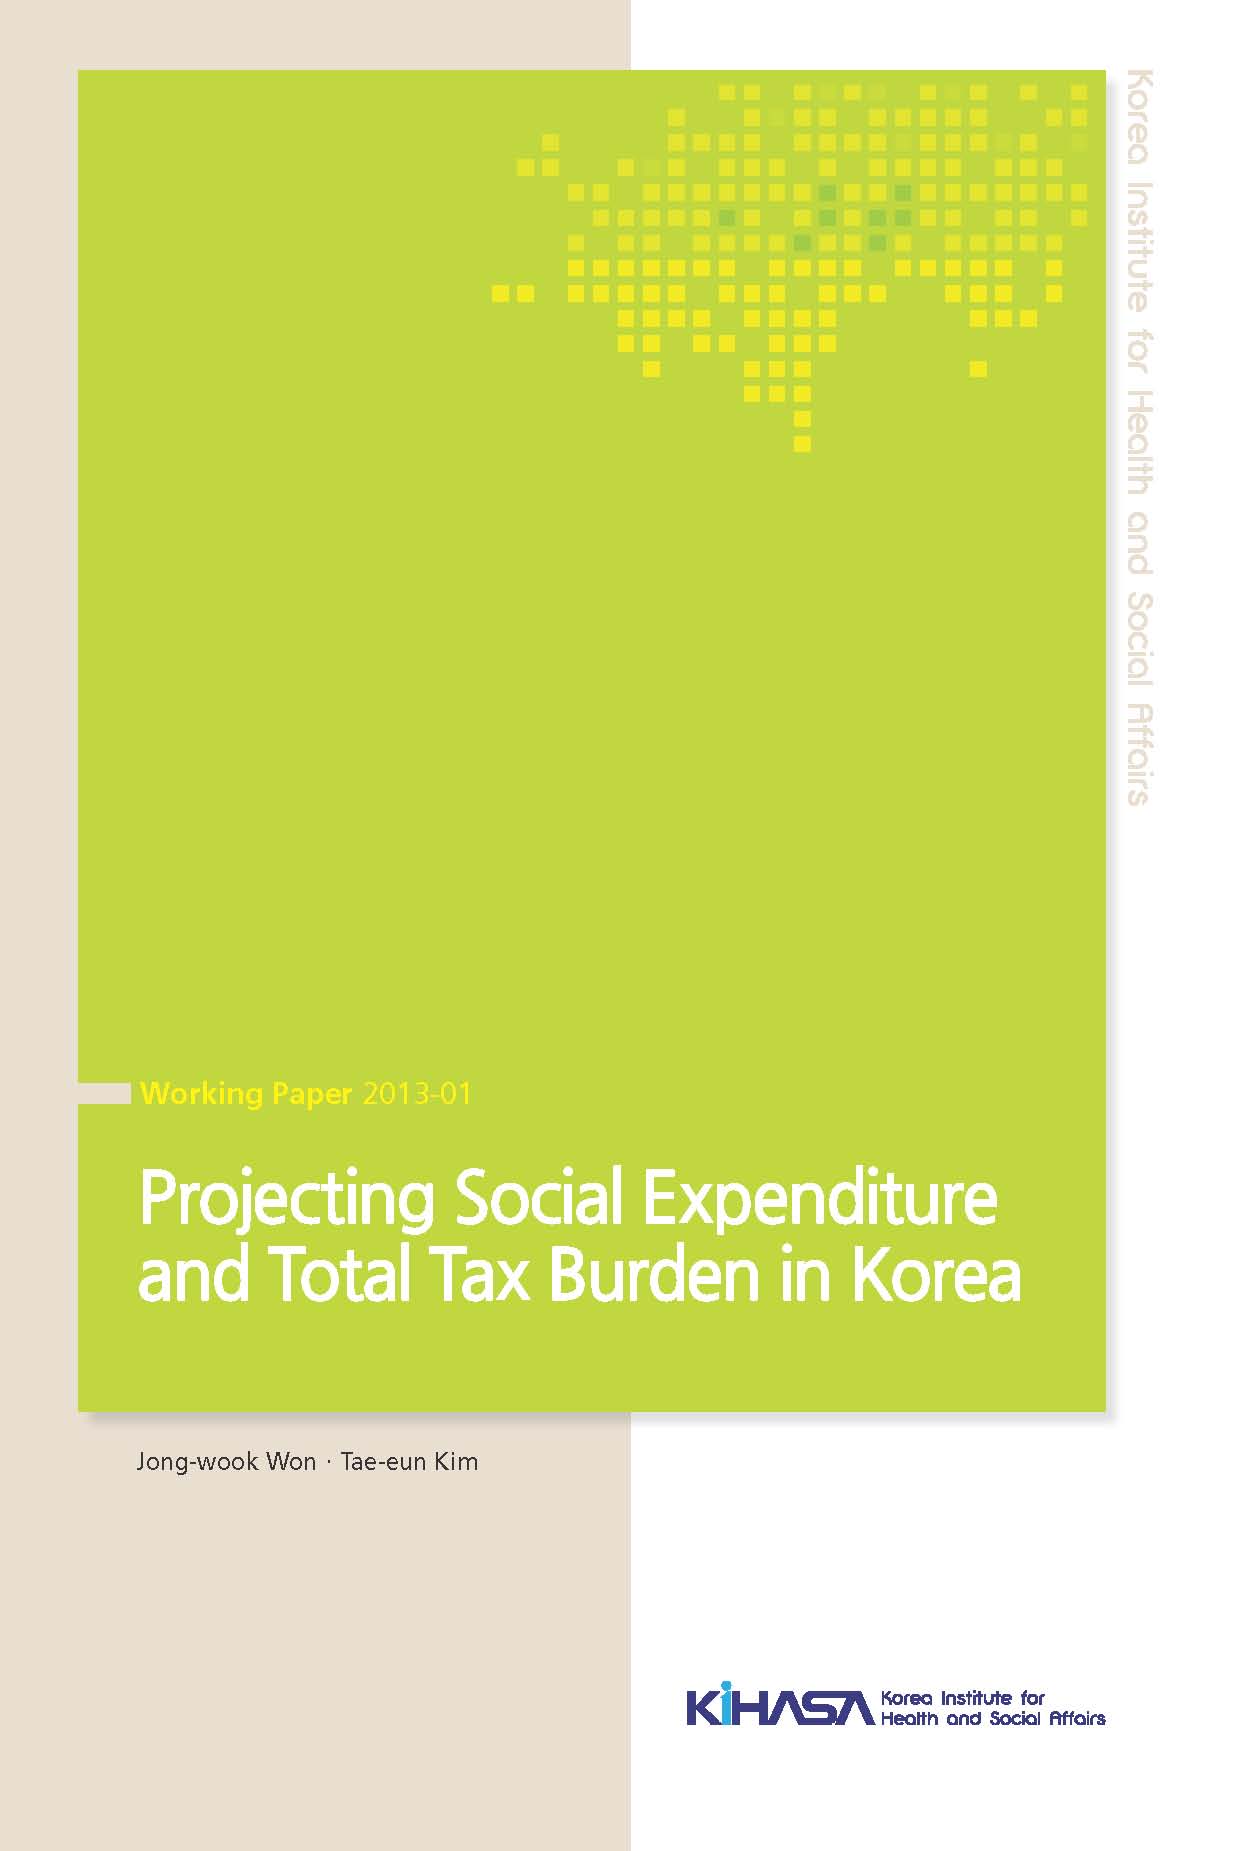 Projecting Social Security Expenditure and Total Tax Burden in Korea